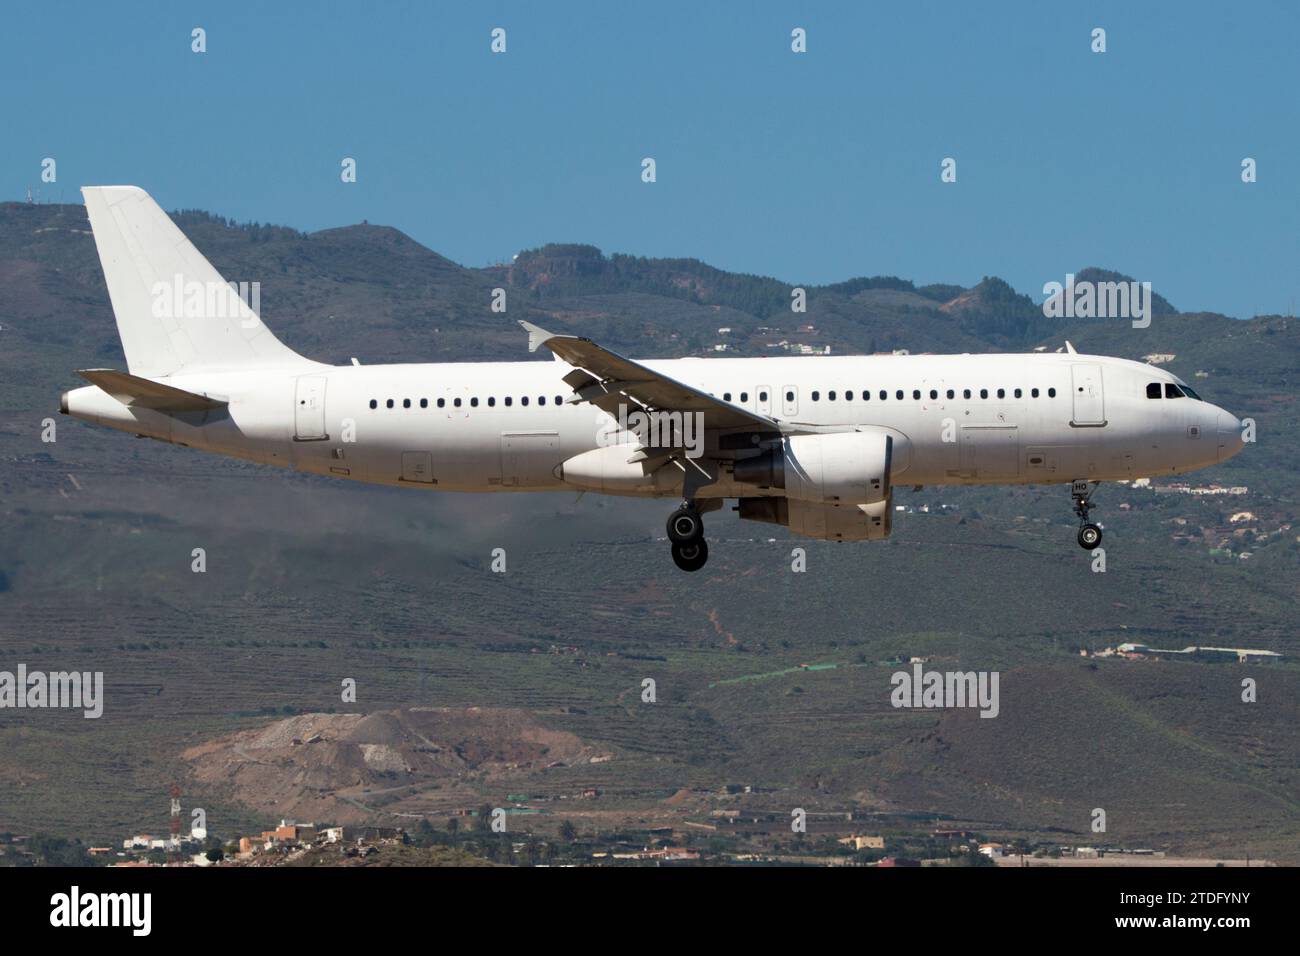 Airbus A320 airliner landing Stock Photo